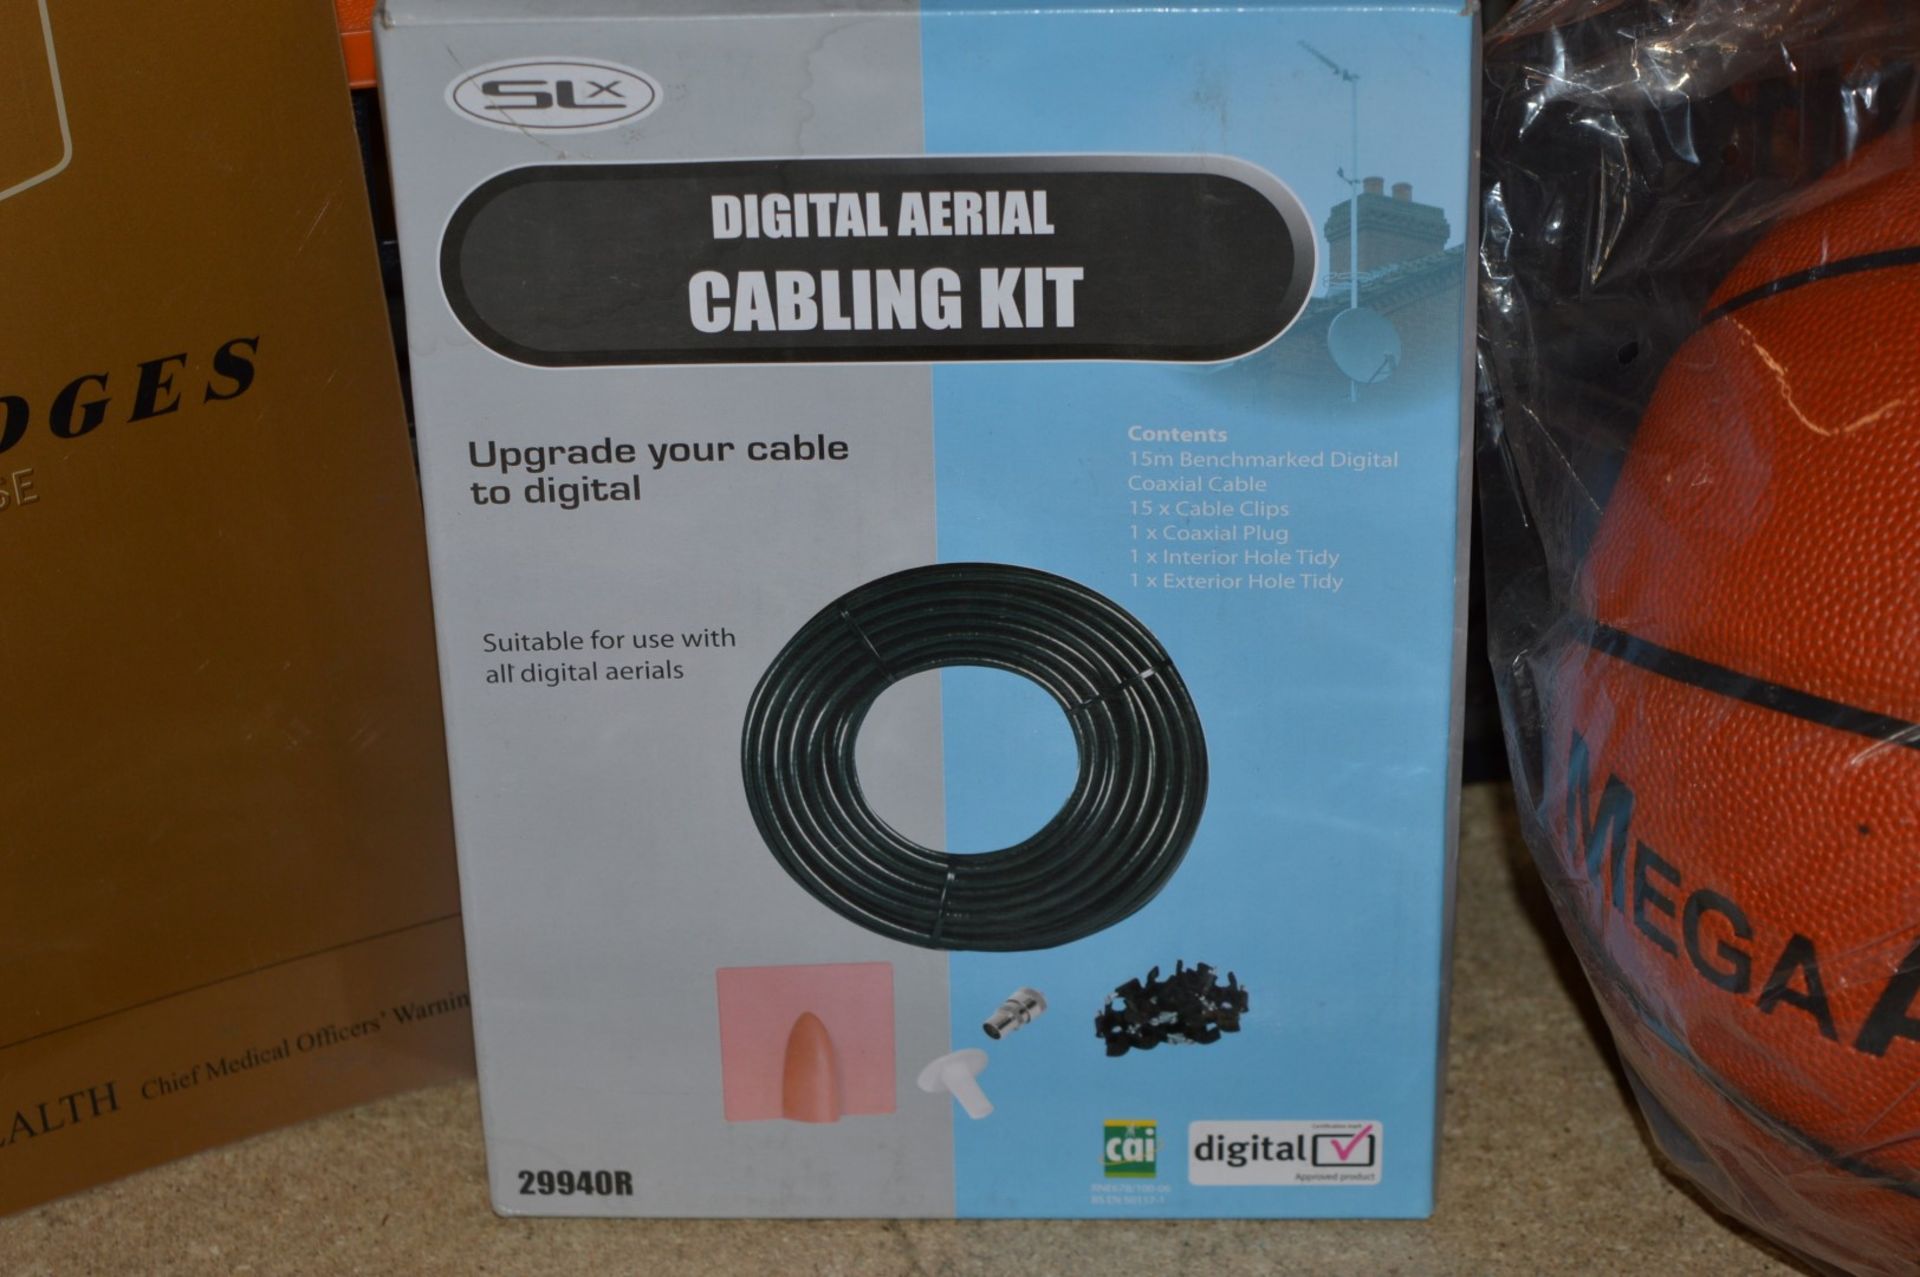 1 x Assortment of Items Including Digital Aerial Cabling Kit, Basketball, HP Printer Cartridges, - Image 3 of 10